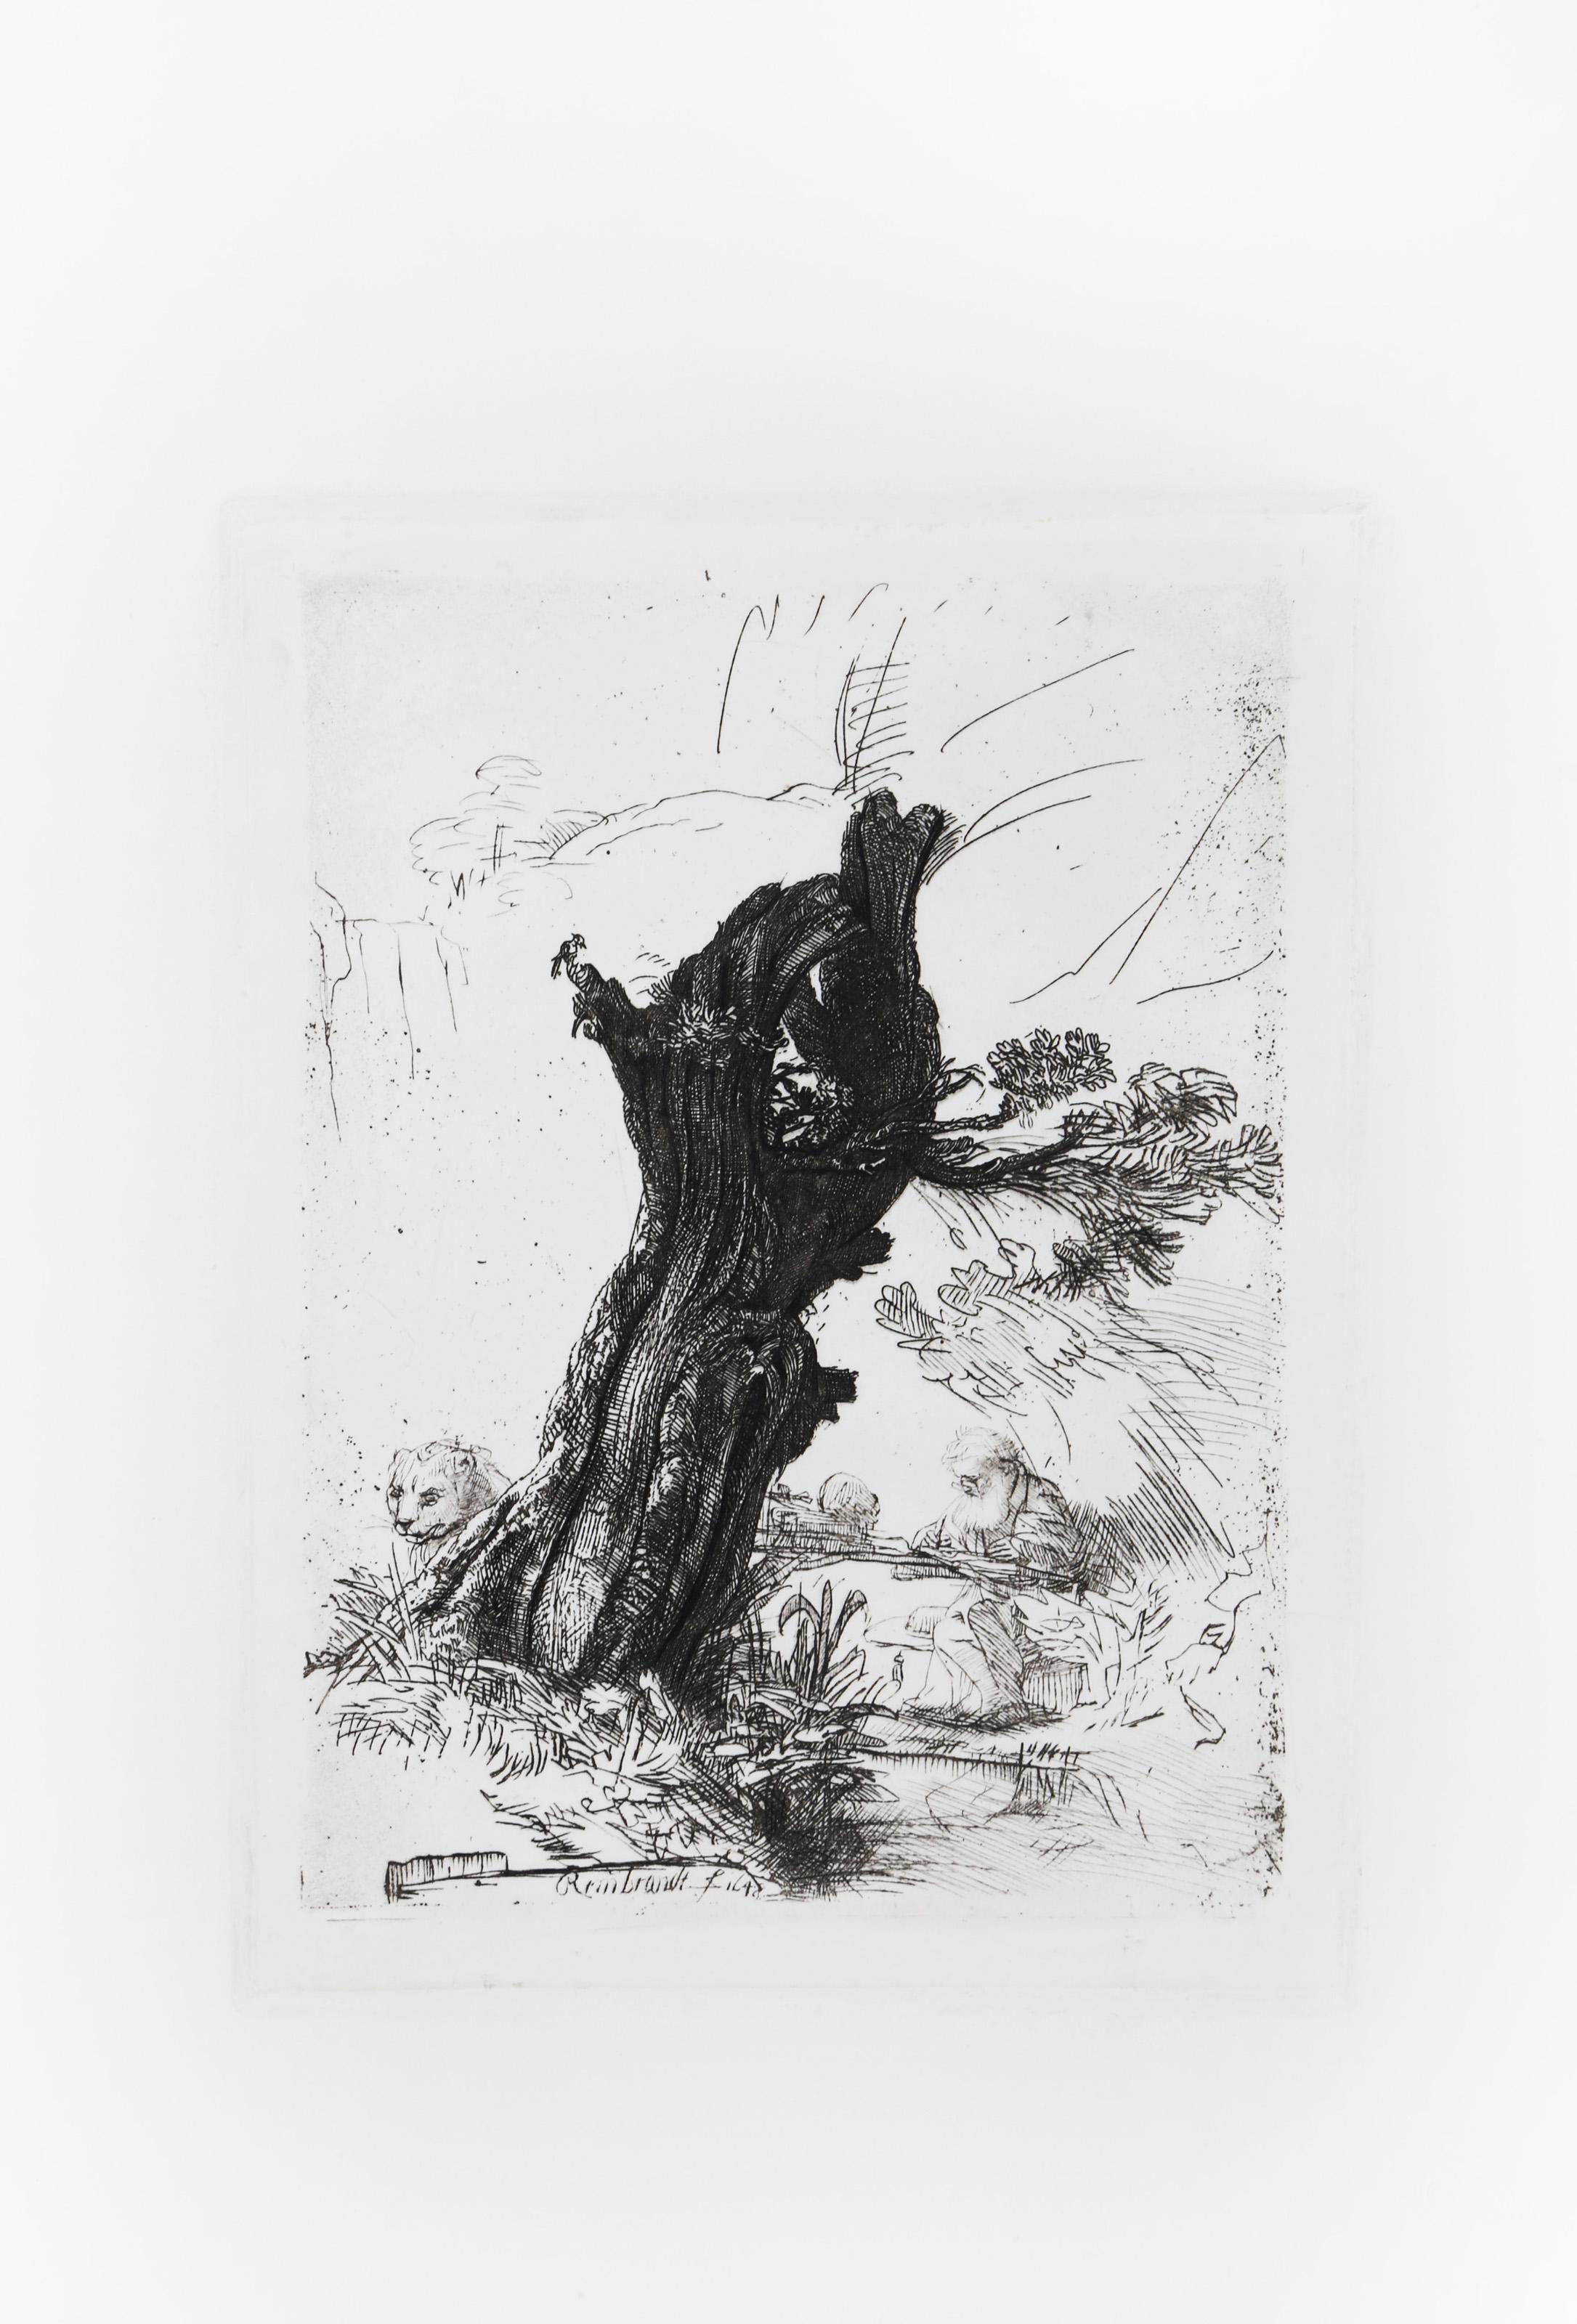  Rembrandt van Rijn, After by Amand Durand, Dutch (1606 - 1669) - St. Jerome beside a pollard willow, Year: Of Original 1648, Medium: Etching, Image Size: 8 x 6 inches, Size: 13  x 11.75 in. (33.02  x 29.85 cm), Printer: Amand Durand, Description: